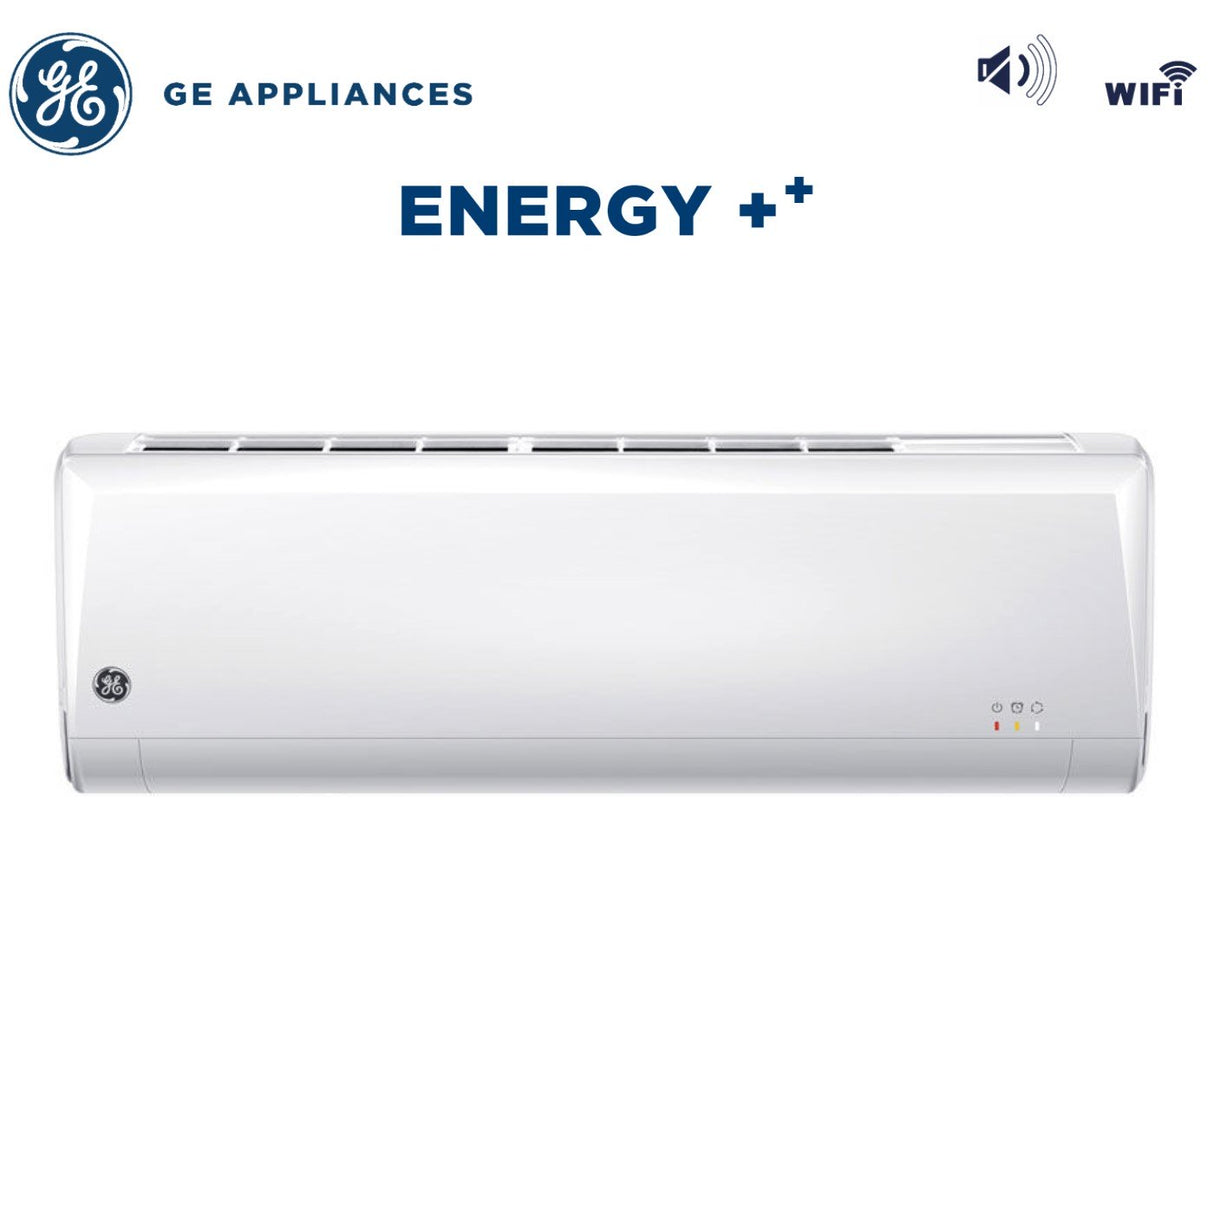 immagine-2-ge-appliances-climatizzatore-condizionatore-general-electric-ge-appliances-inverter-serie-energy-12000-btu-ges-nig35in-ges-nig35out-r-32-wi-fi-optional-classe-aa-ean-8059657002495